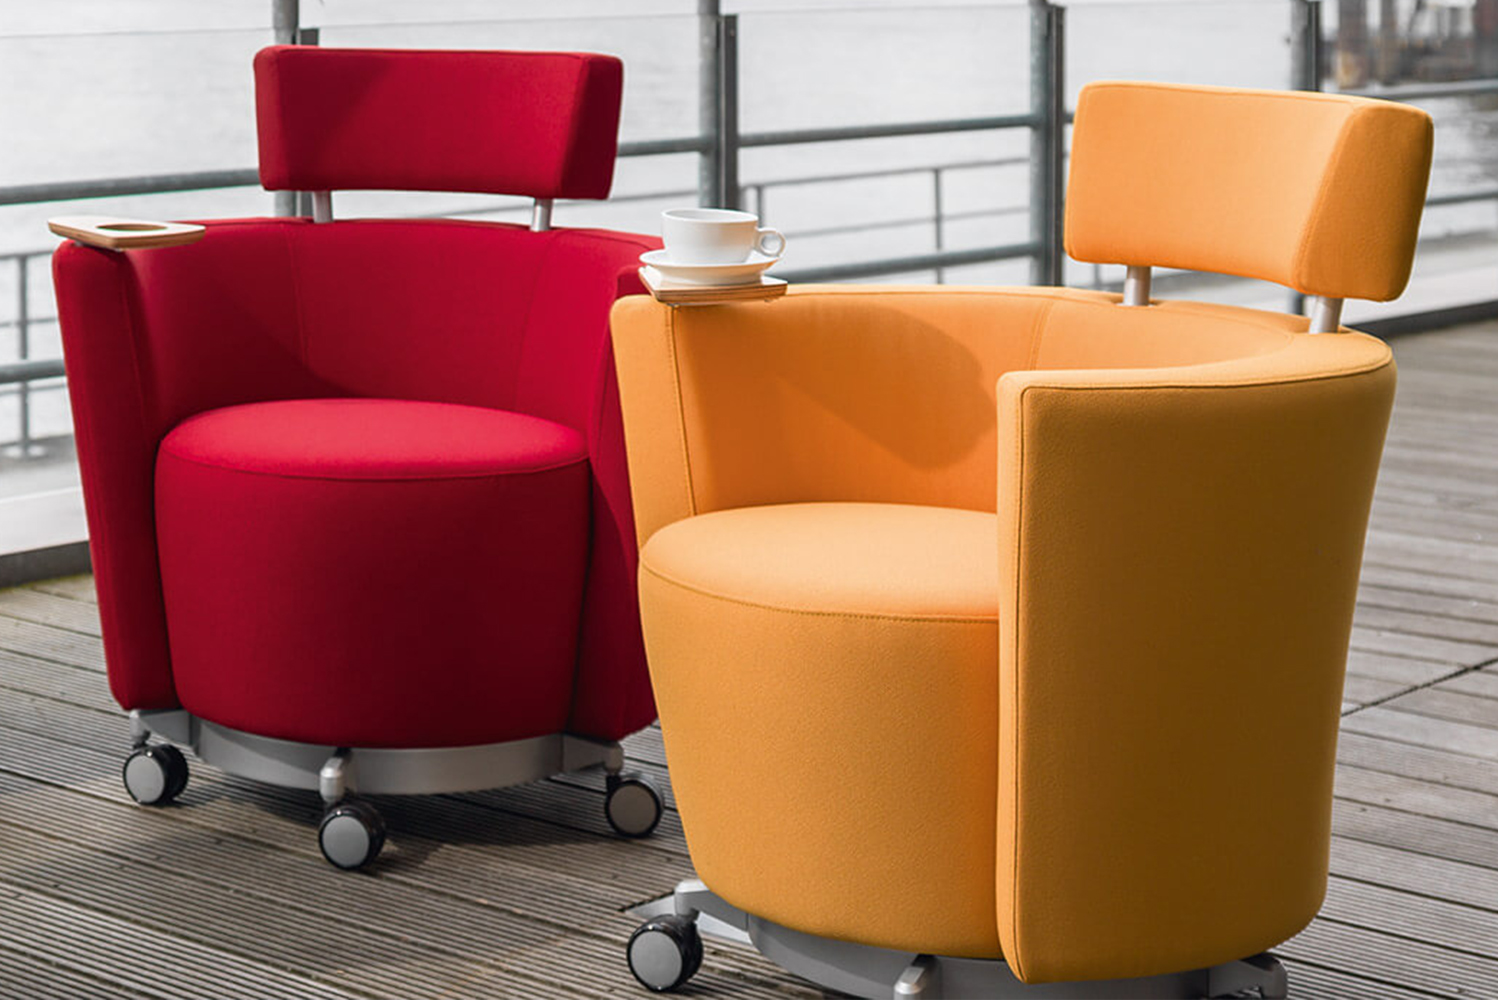 Introducing the Hello chair by CSD Studio for contract furniture manufacturer Haworth 